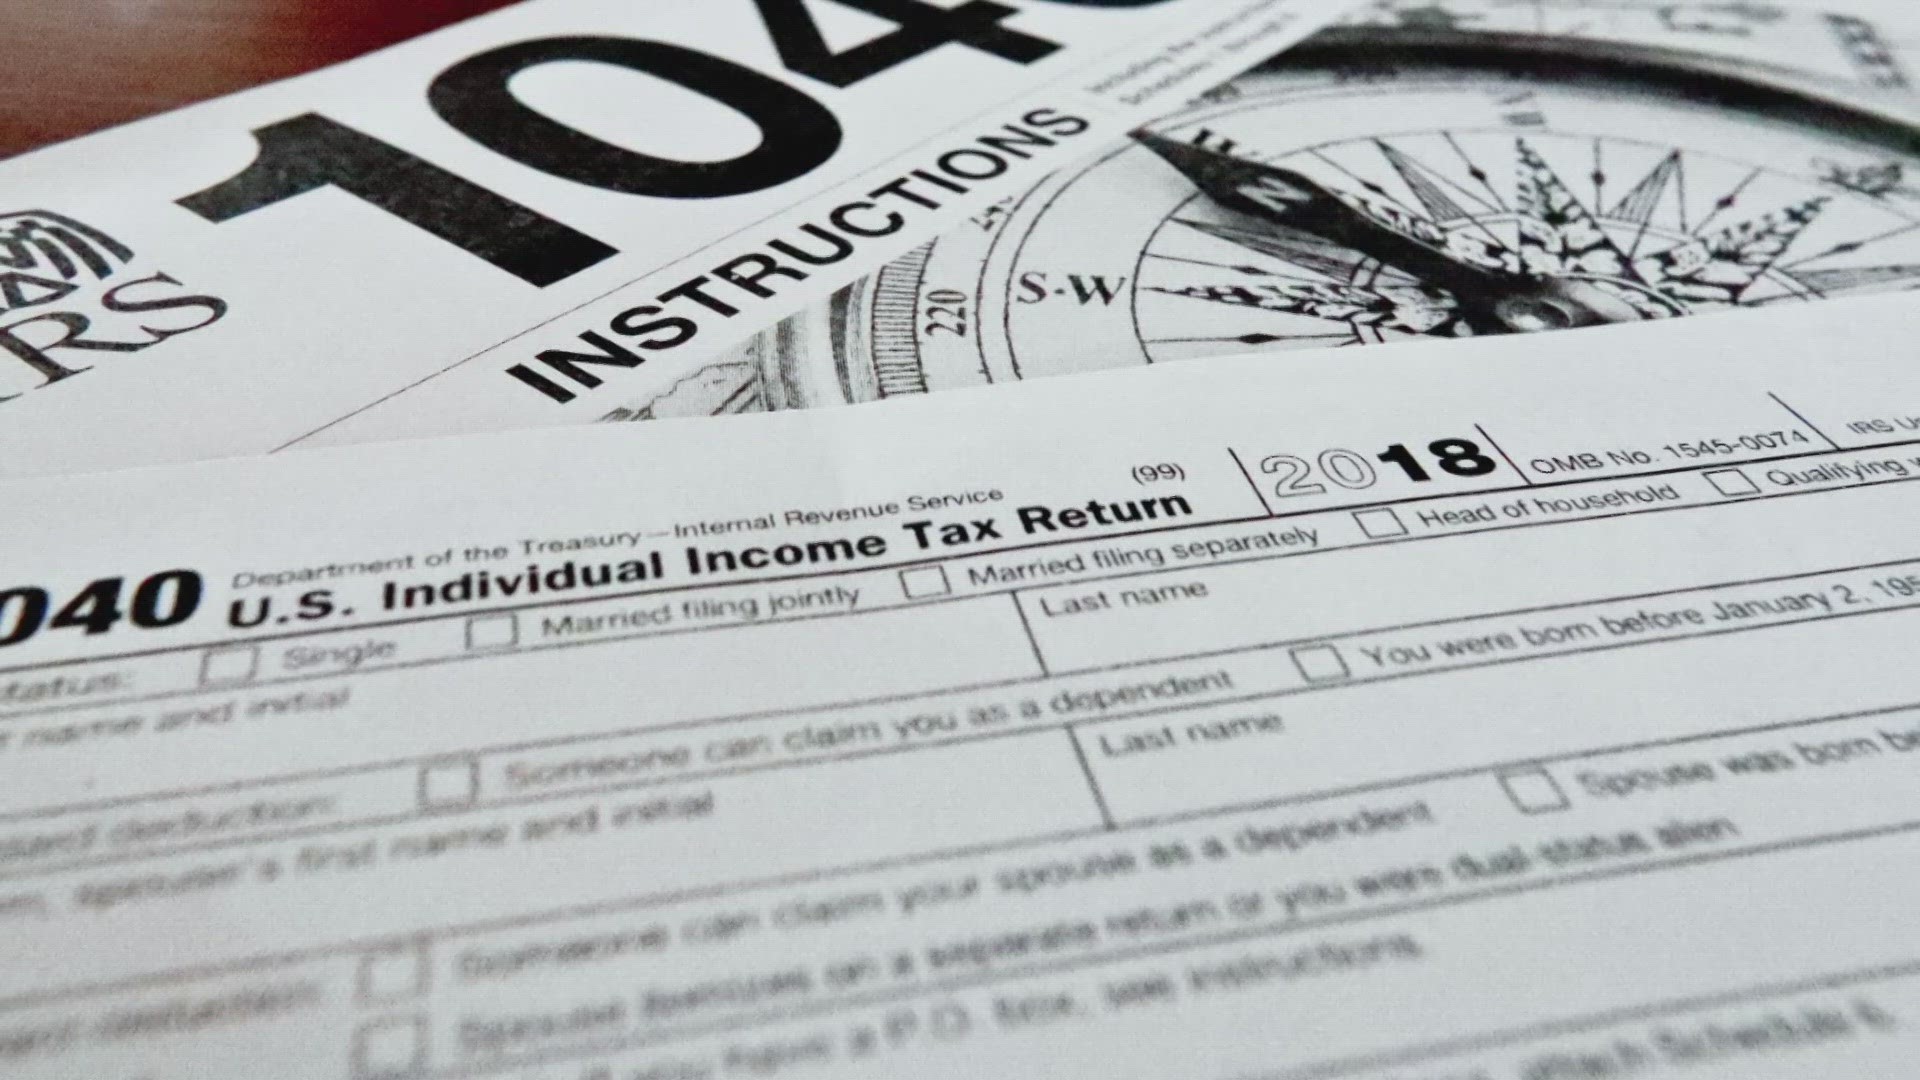 The IRS began accepting tax returns on Monday.